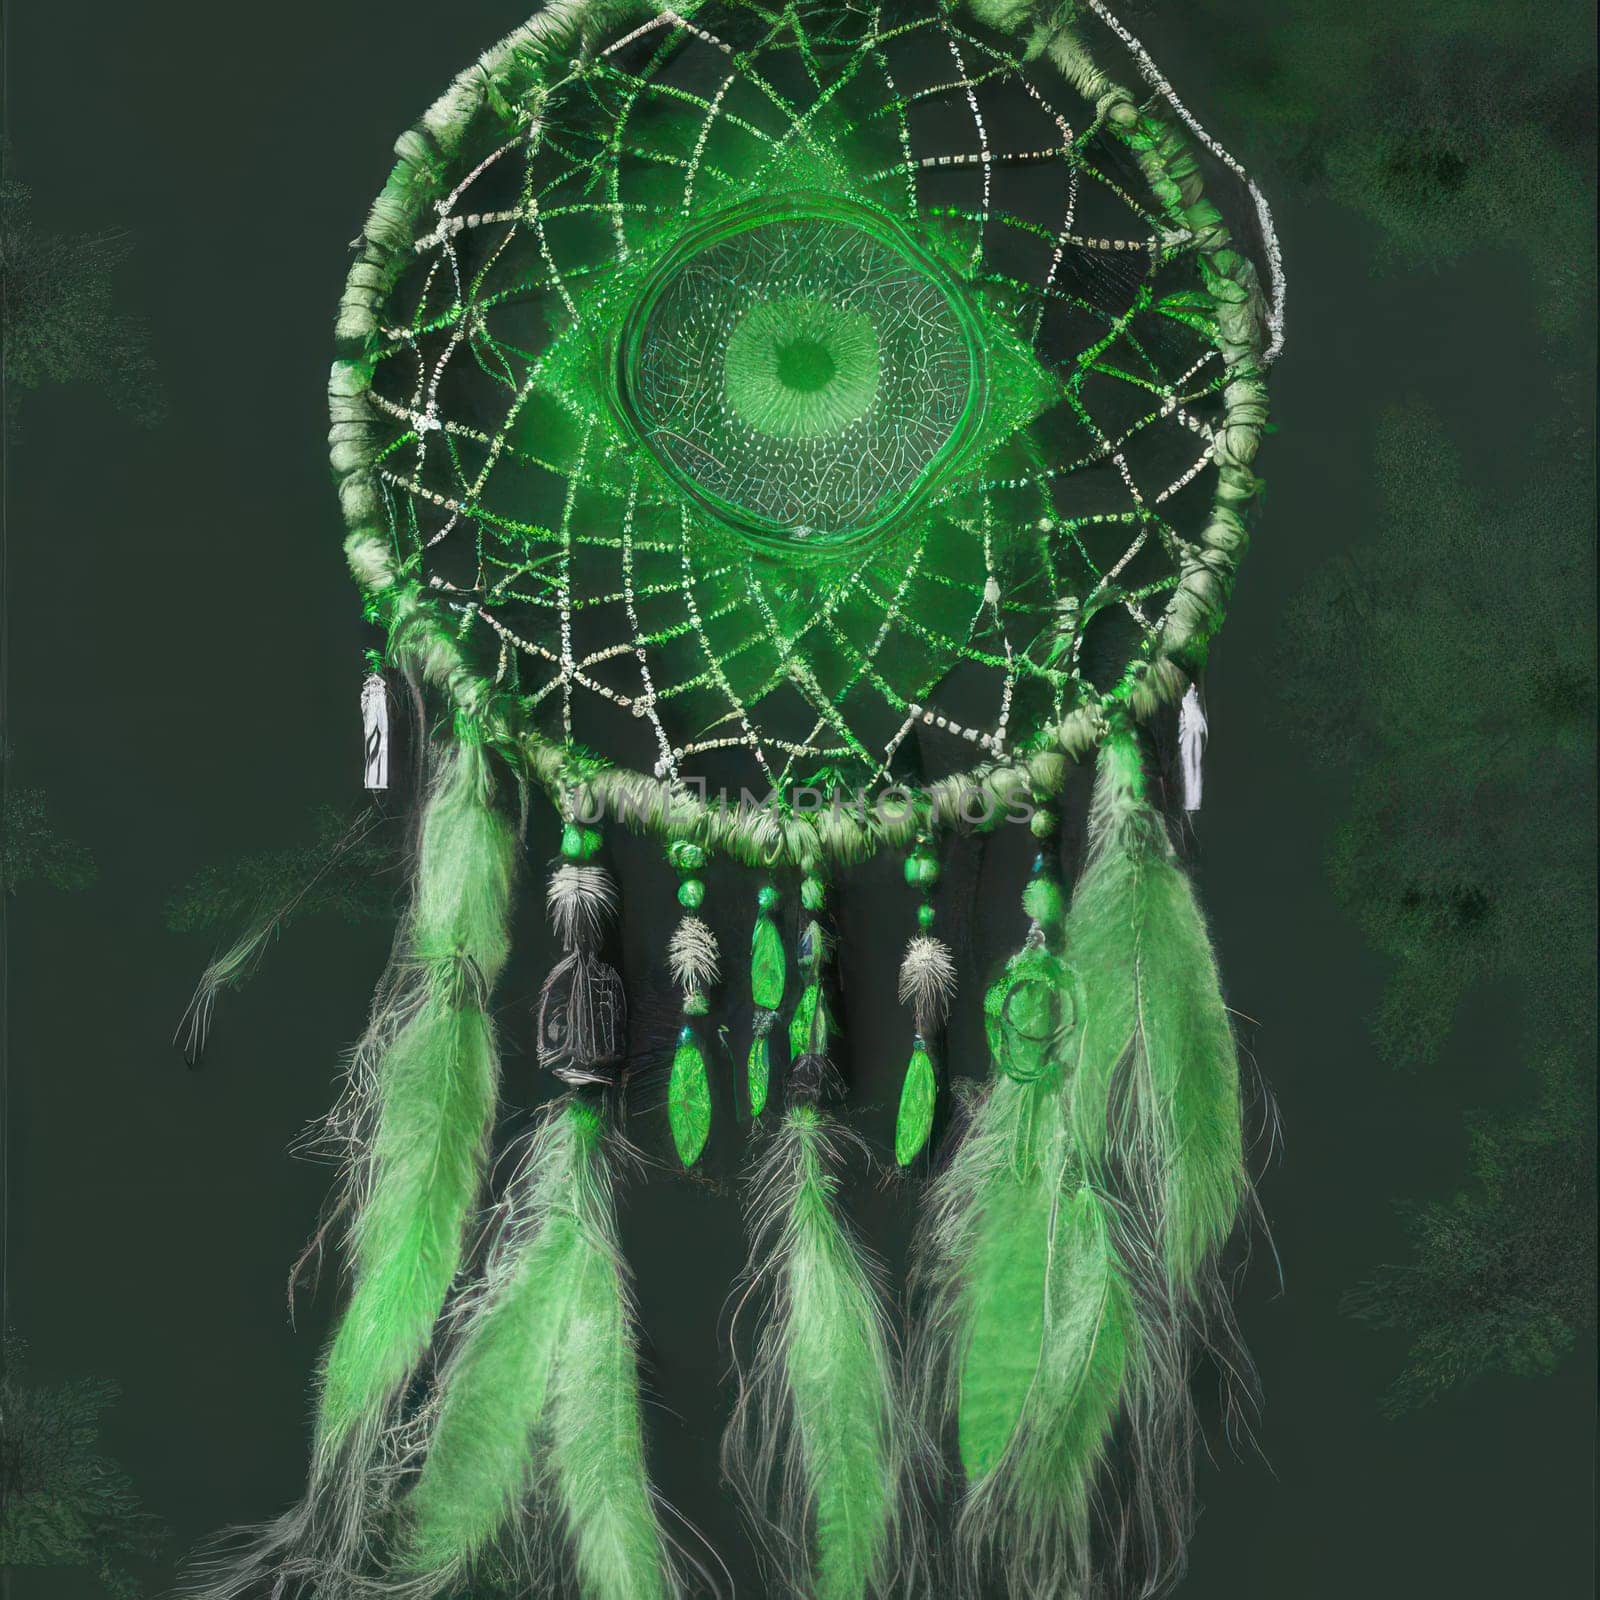 Dreamcatcher. Image created by AI by nolimit046